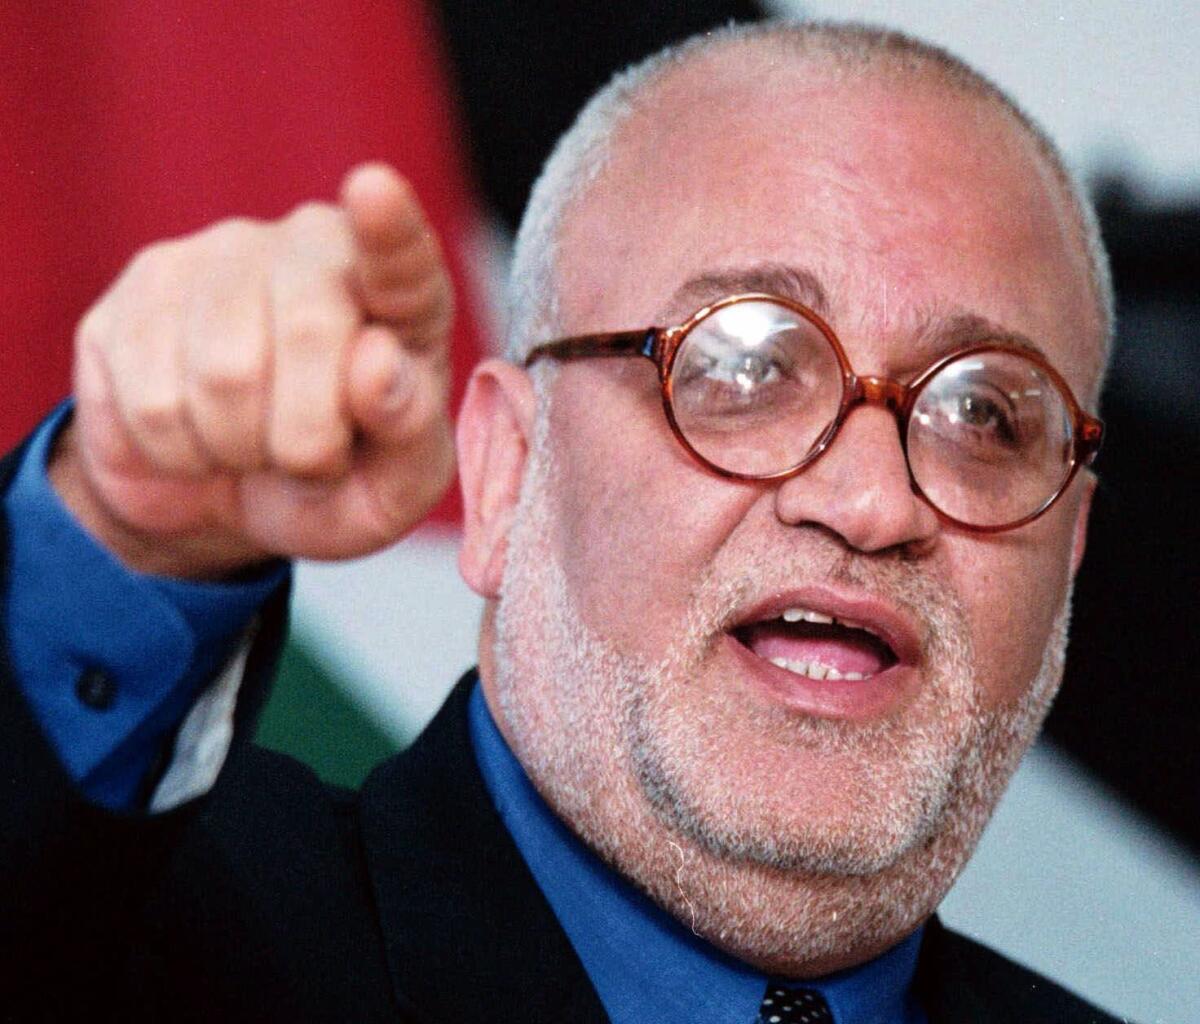 Saeb Erekat, the chief Palestinian negotiator with Israel for the last two decades, speaks at a news conference in the West Bank town of Ramallah in 2001.